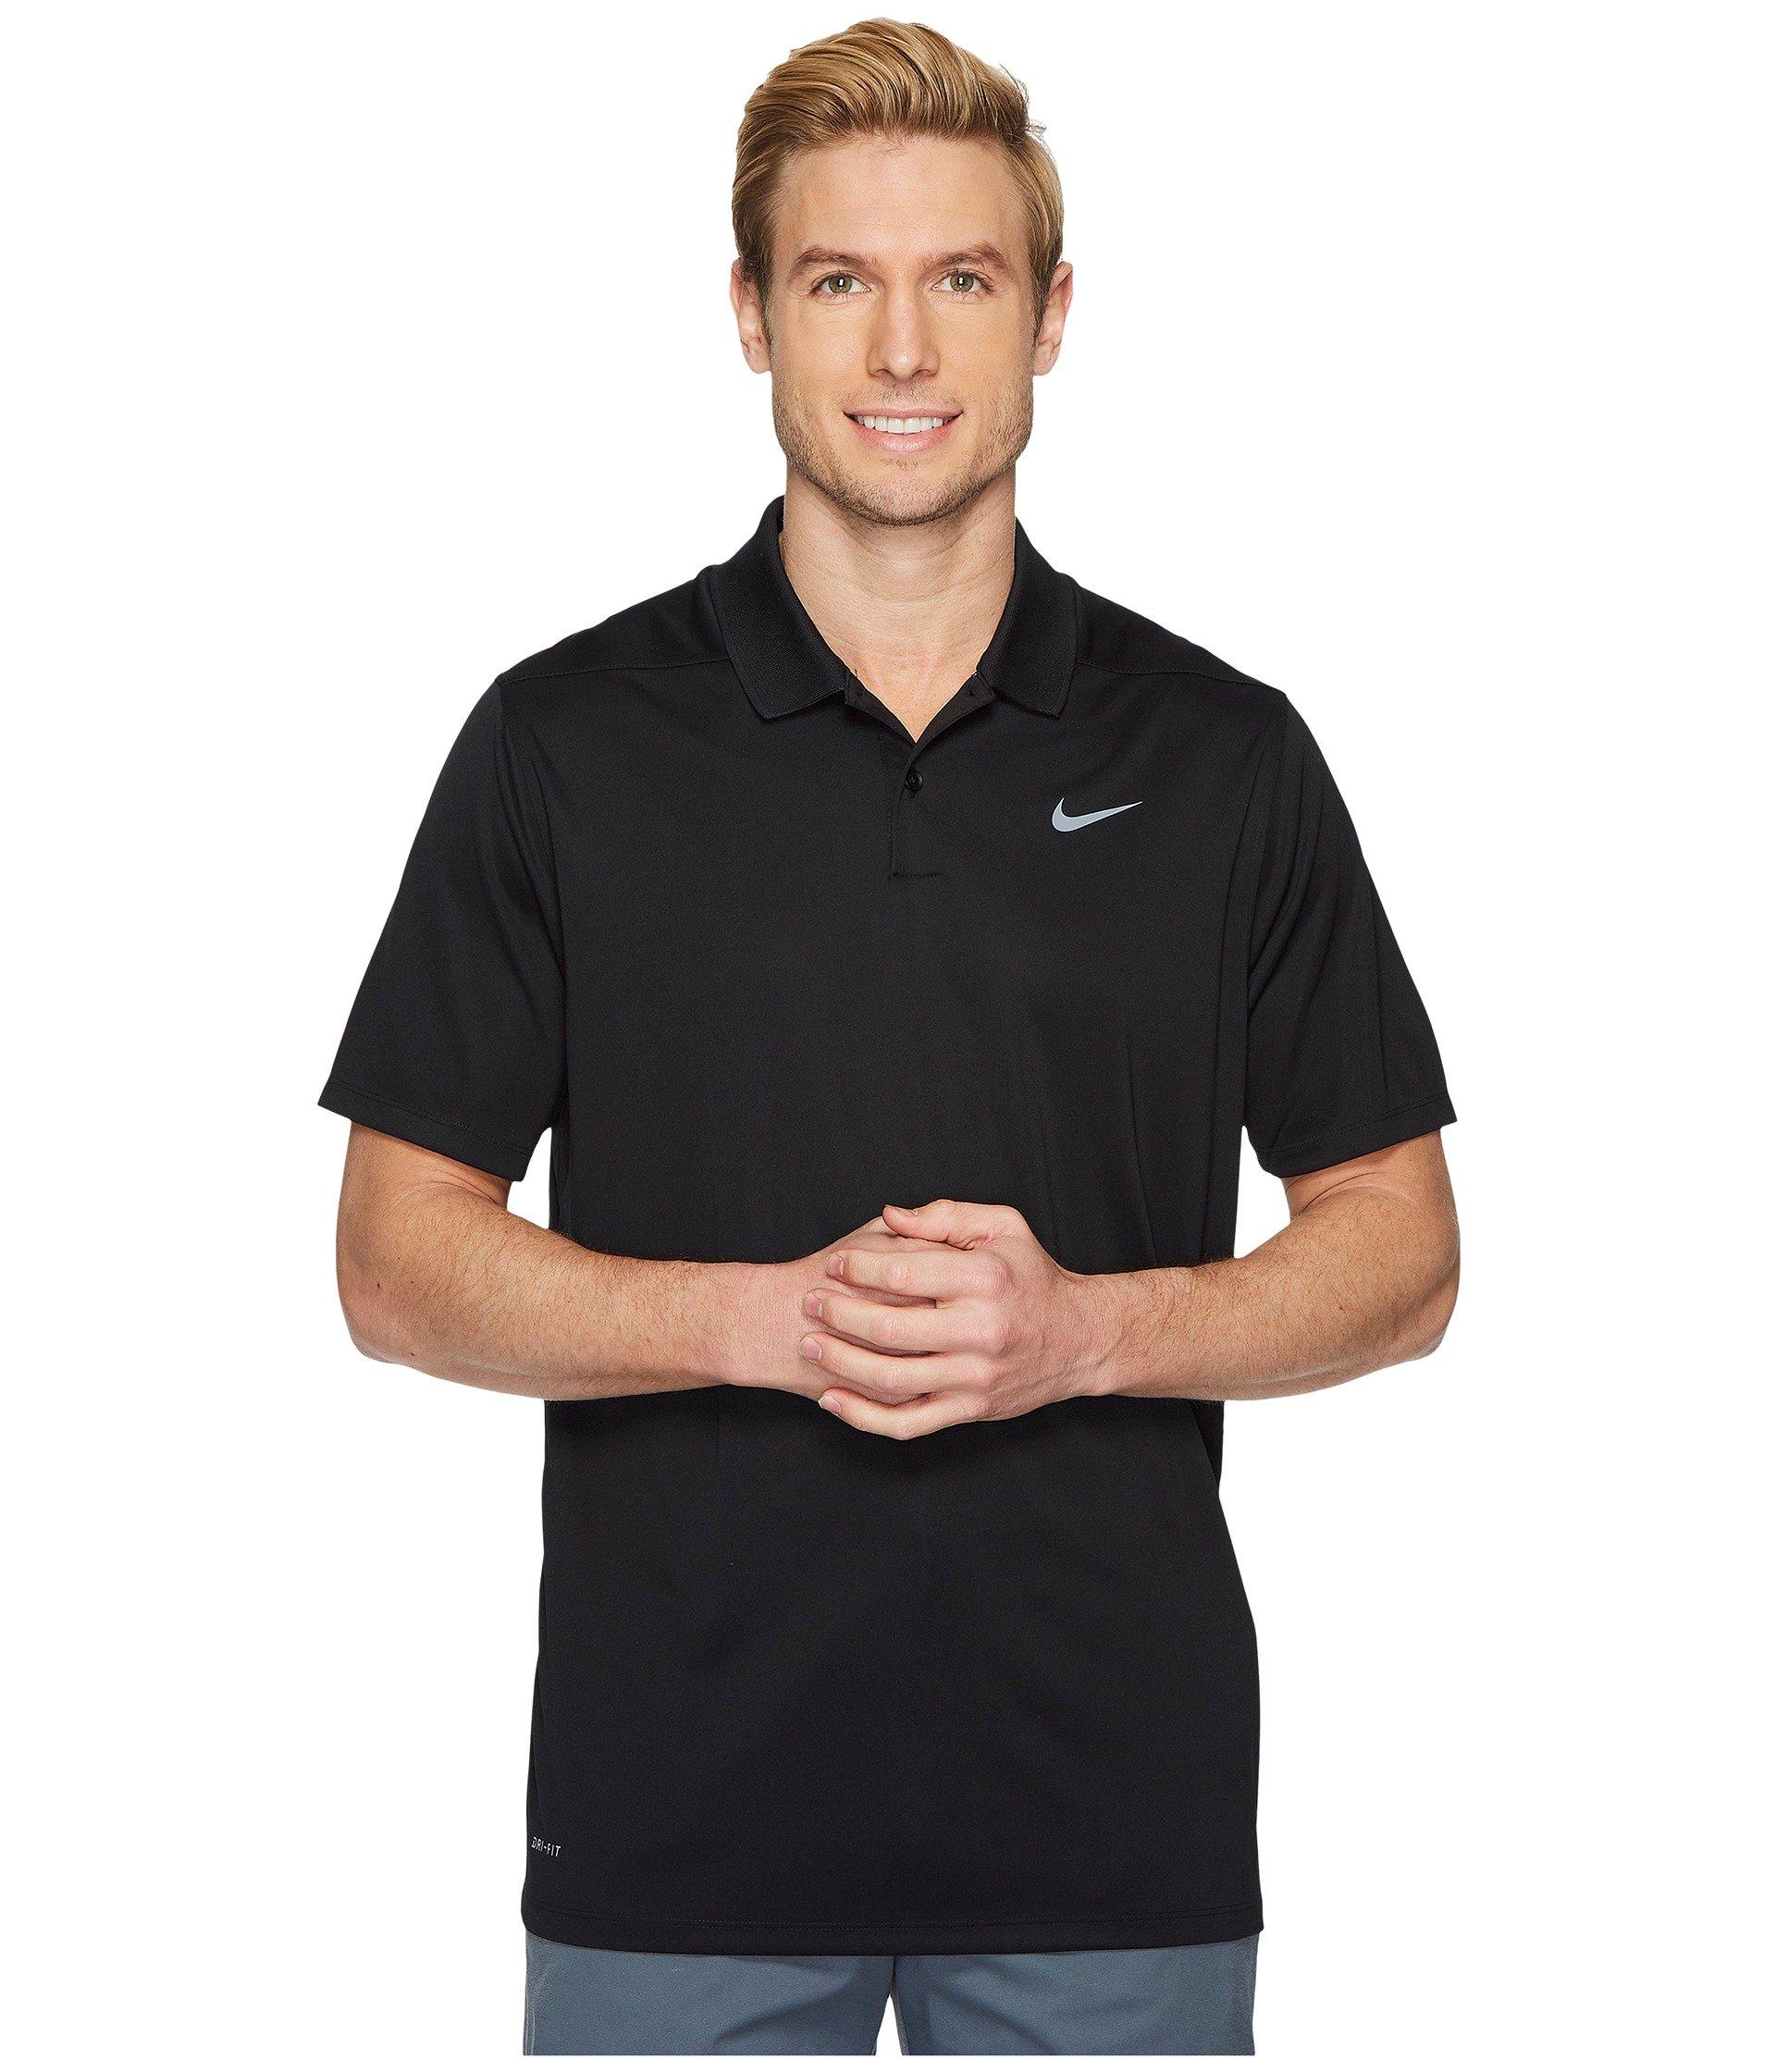 Nike Dri-fit Victory Golf Polo in Black for Men - Save 16% - Lyst